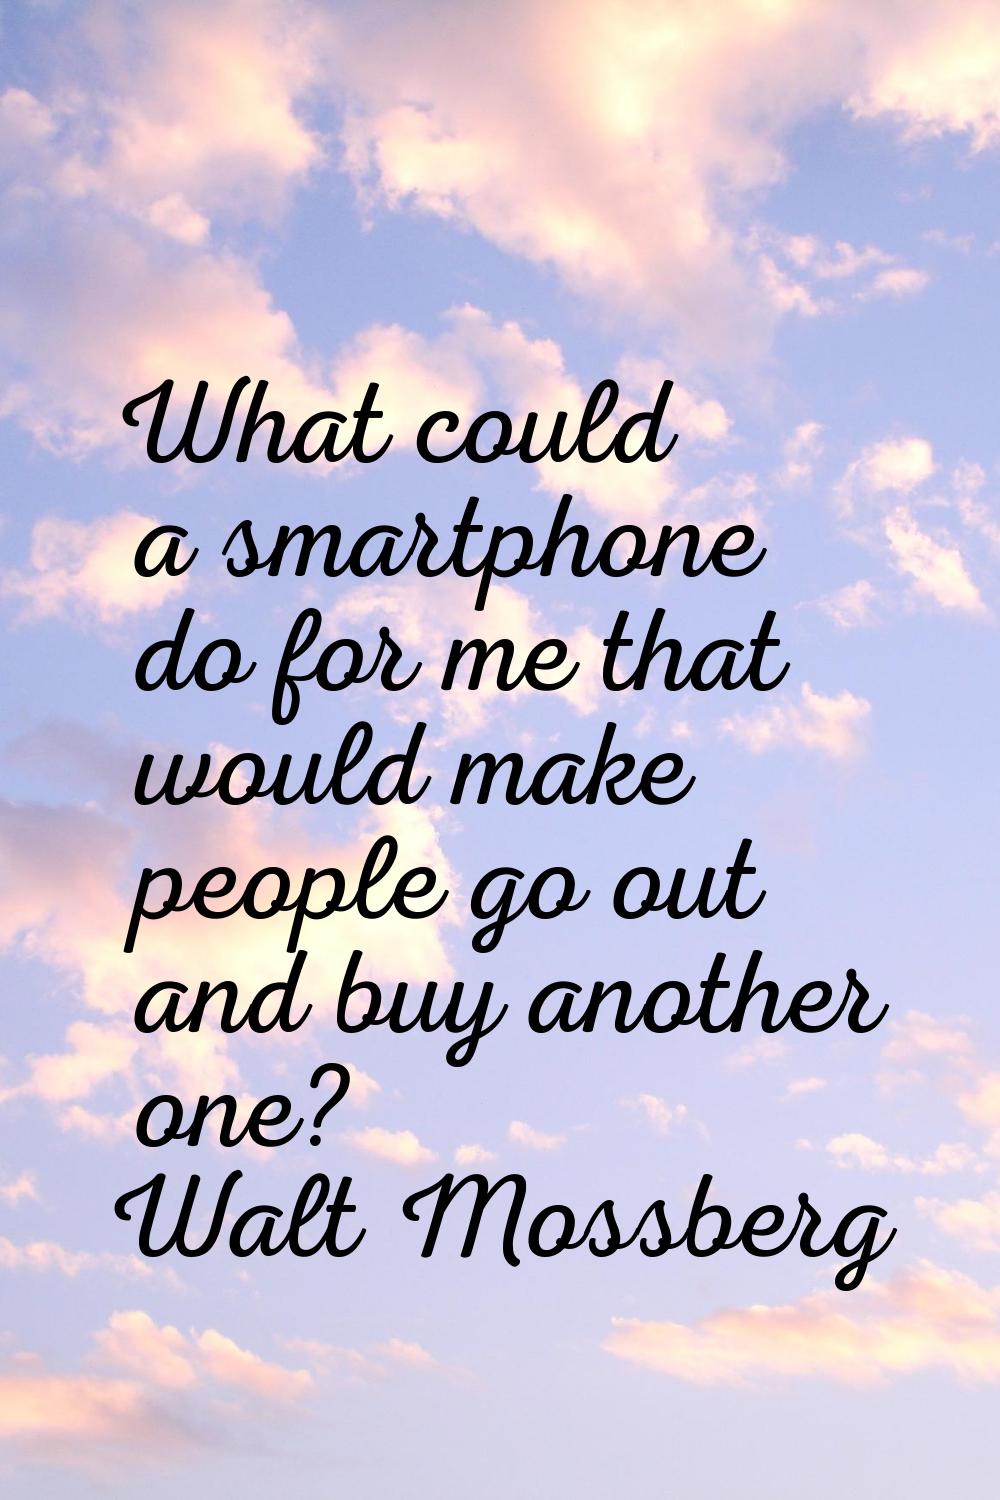 What could a smartphone do for me that would make people go out and buy another one?